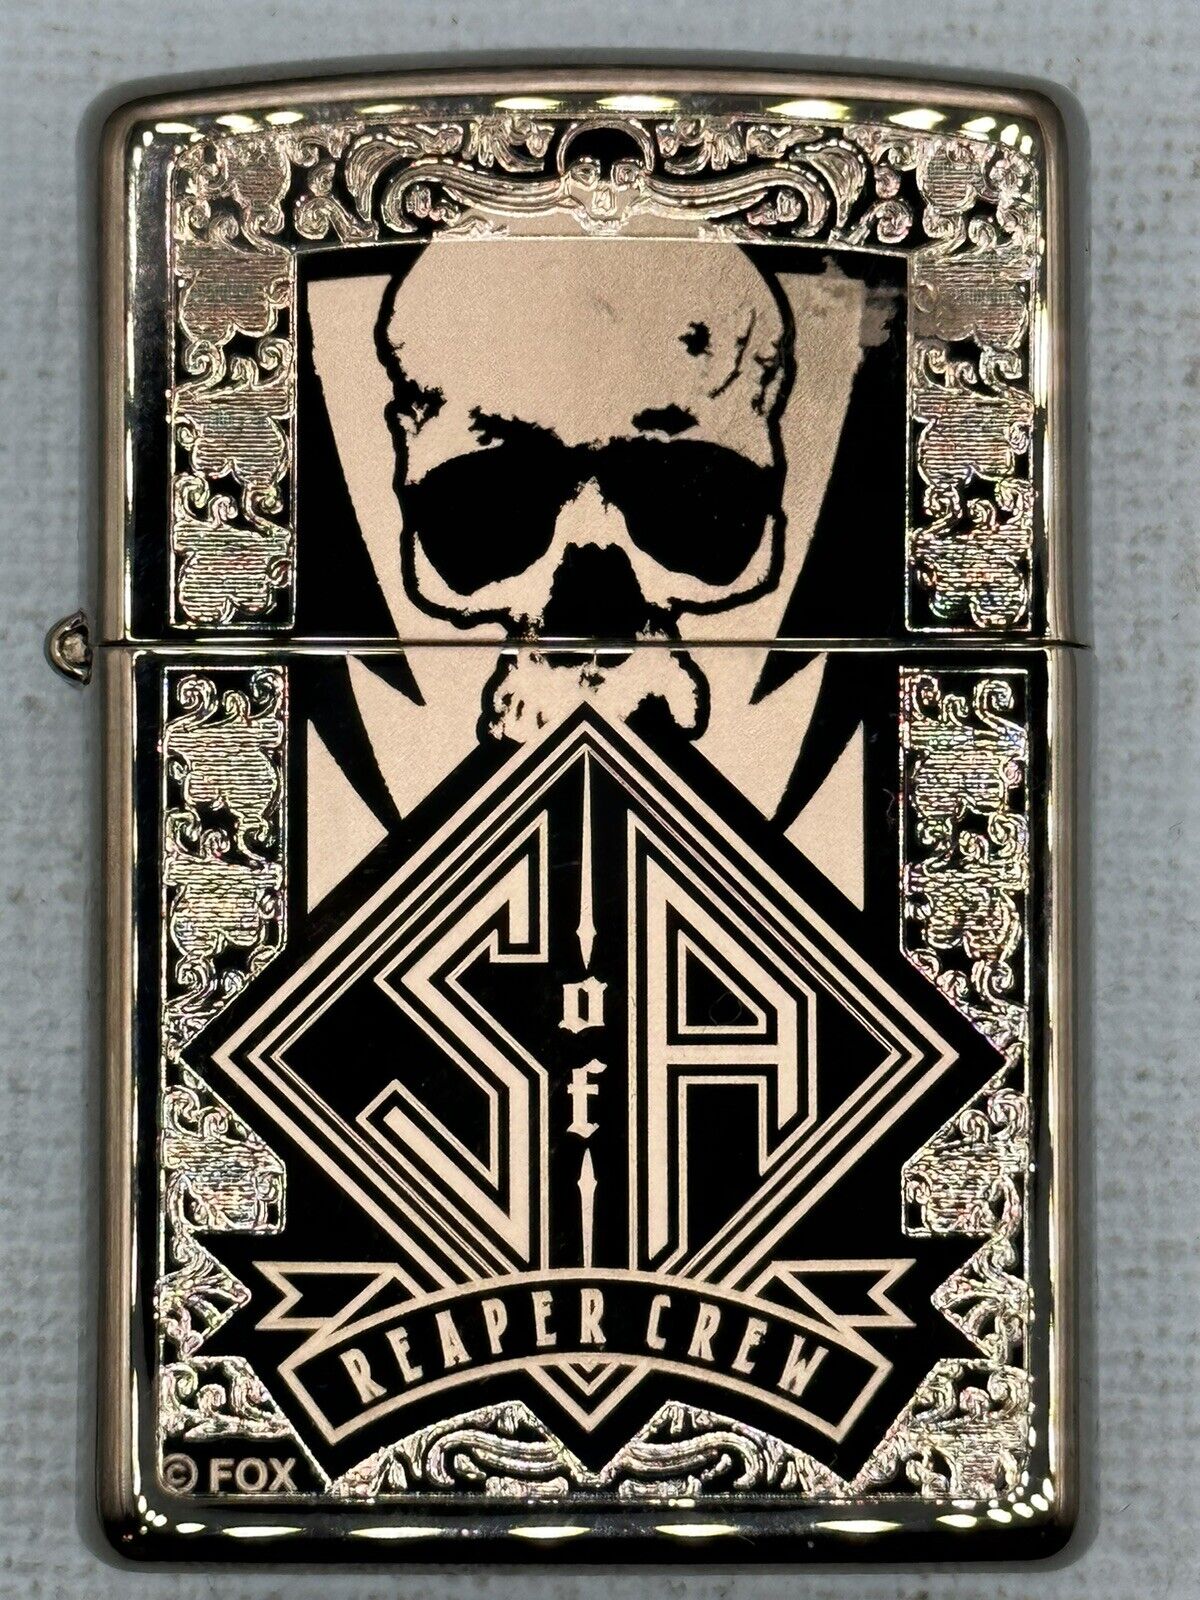 2015 Sons Of Anarchy Reaper Crew Black Ice Zippo Lighter NEW Never Struck